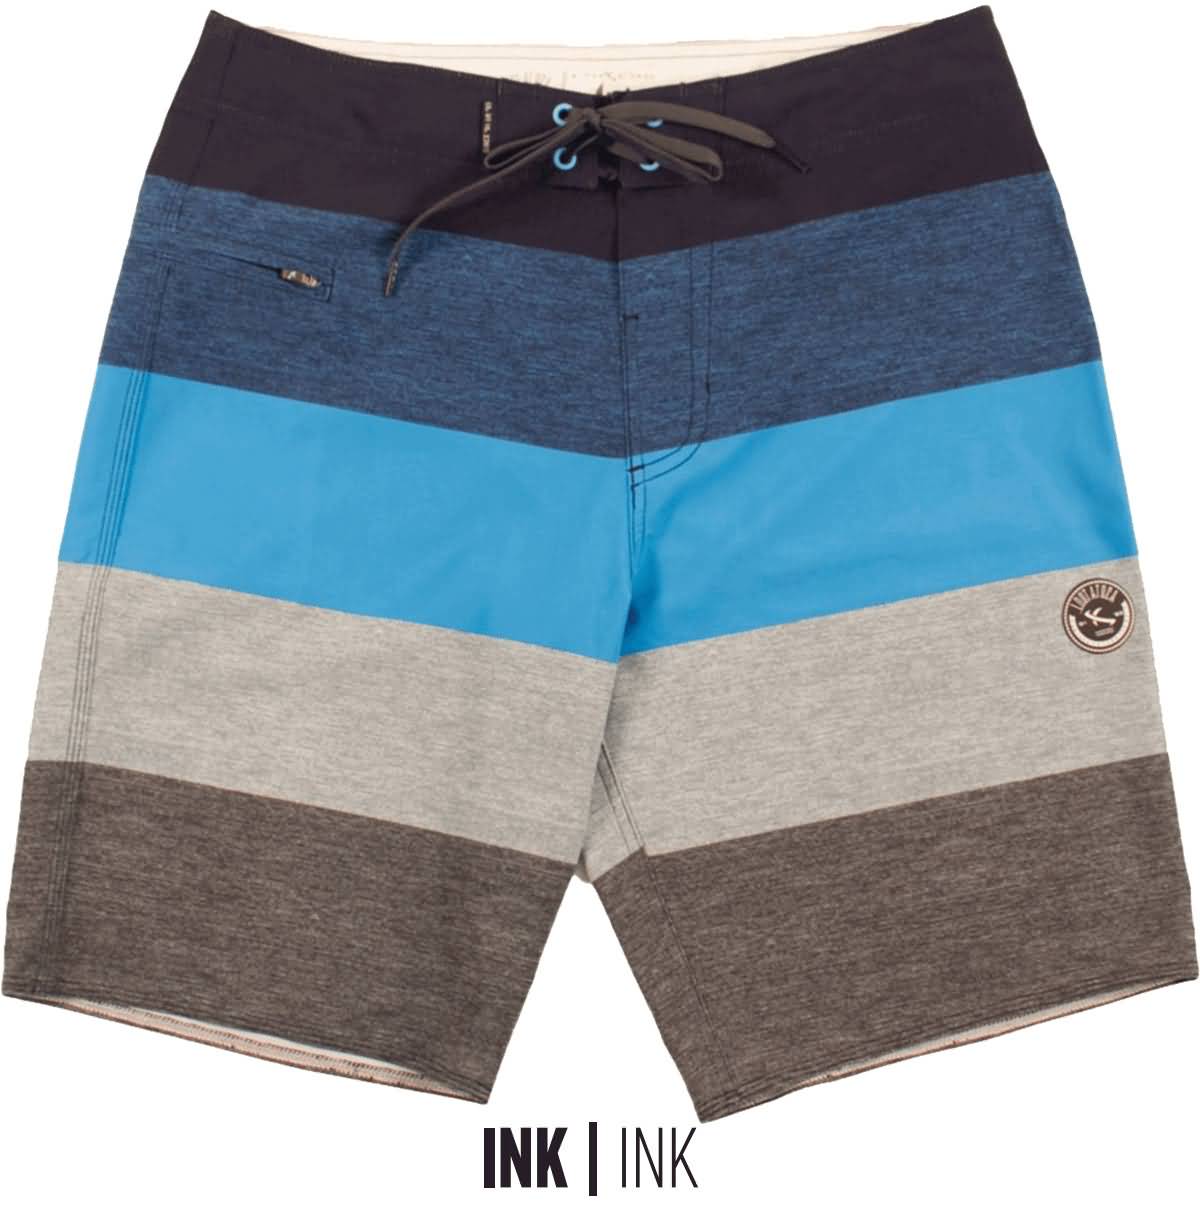 Lost Surf Fall 2017 Mens Beach Surfing Boardshorts Collection